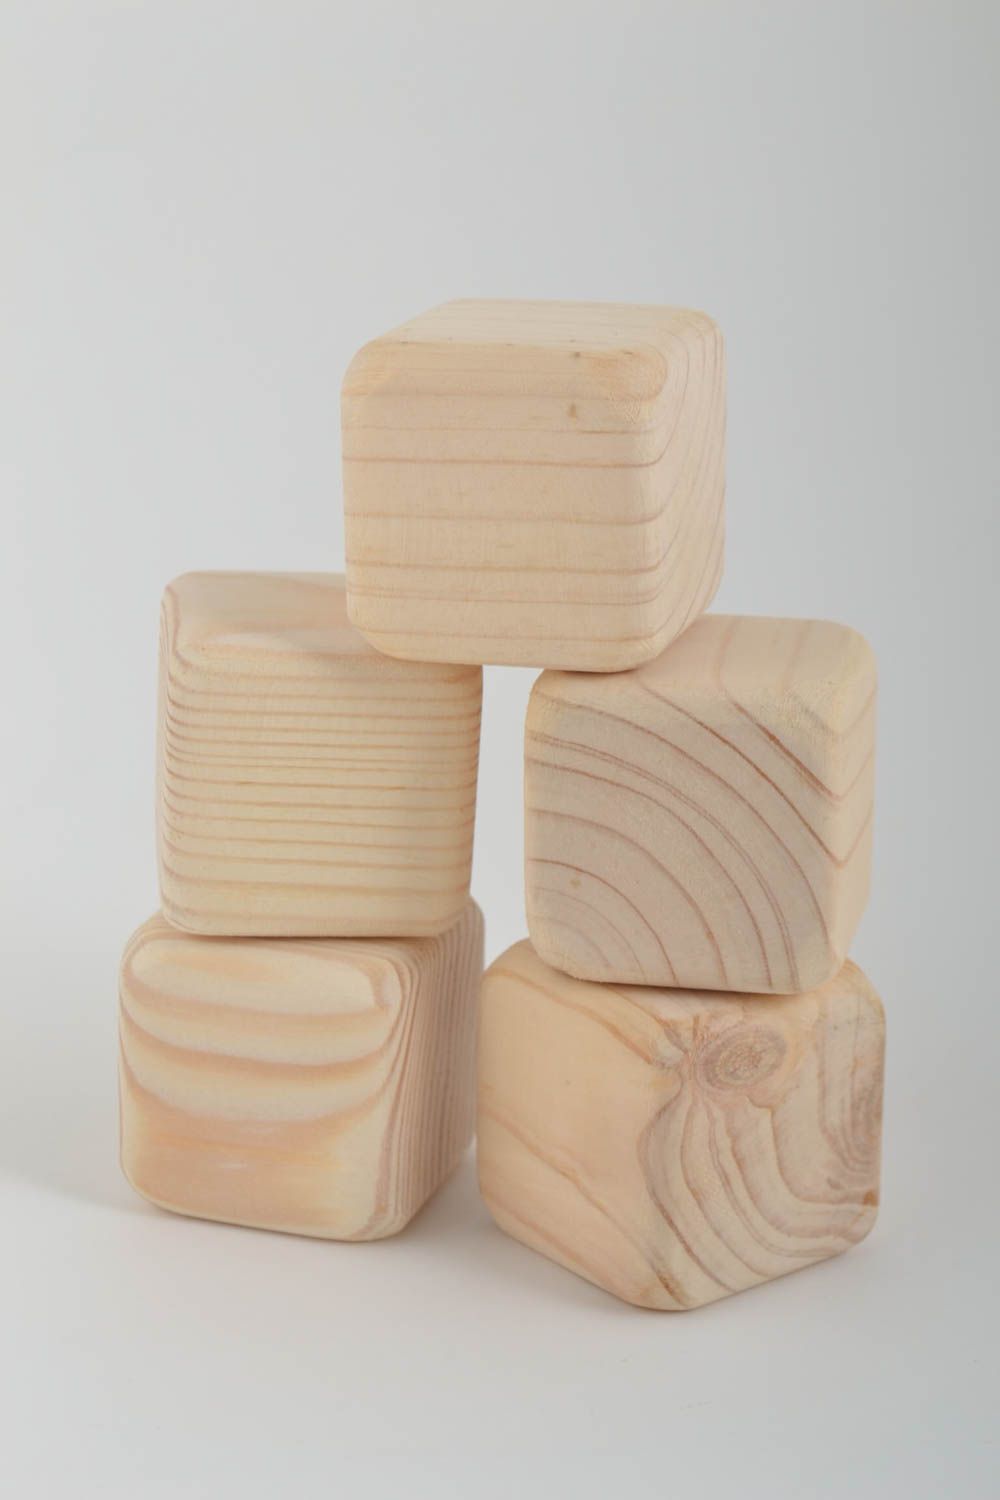 Set of 5 handmade wooden cubes blanks for creativity educational toys for kids photo 2